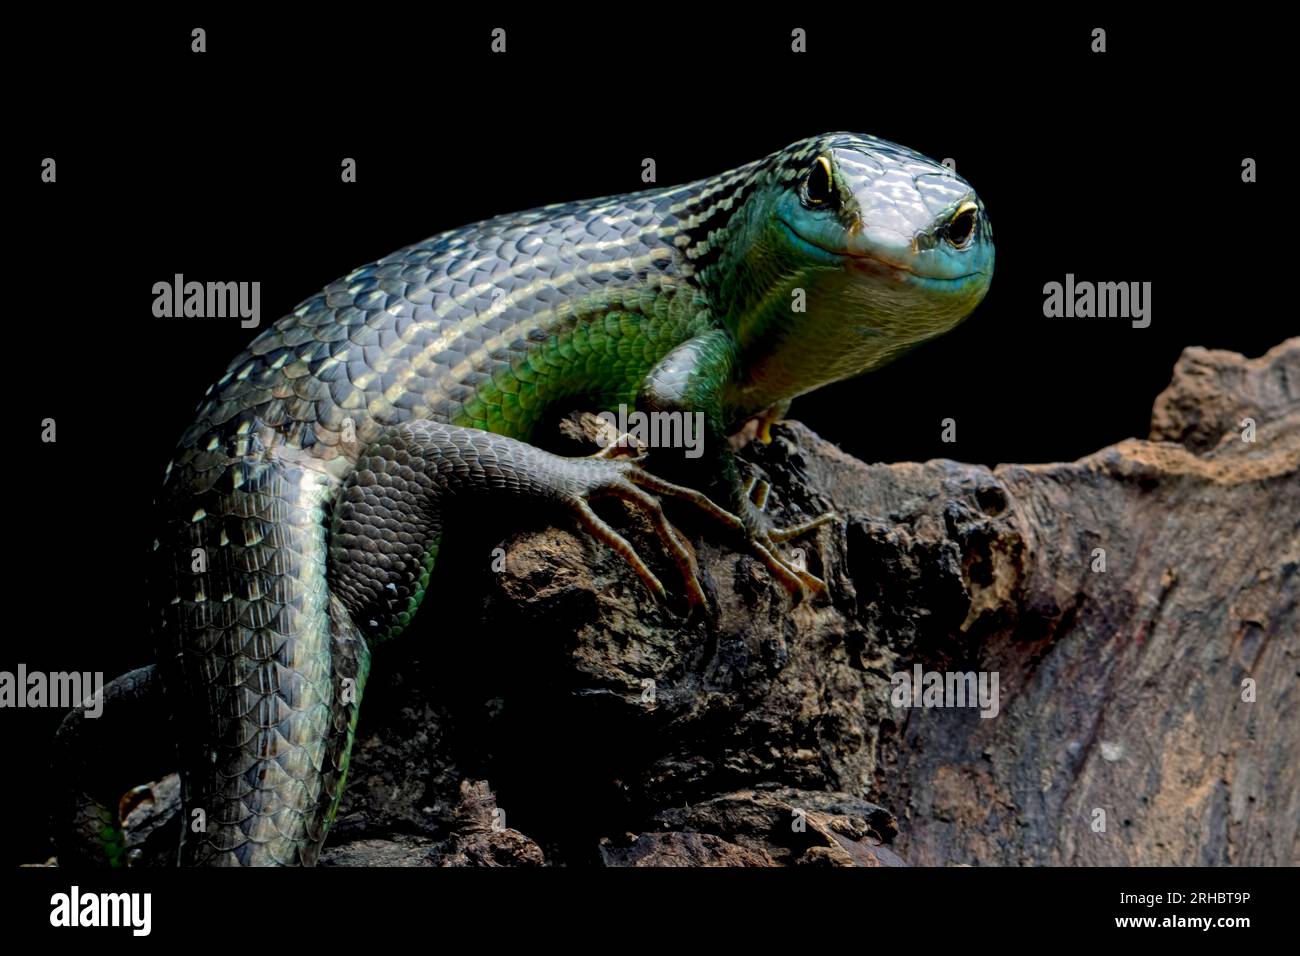 Olive Tree Skink on a tree trunk, Indonesia Stock Photo